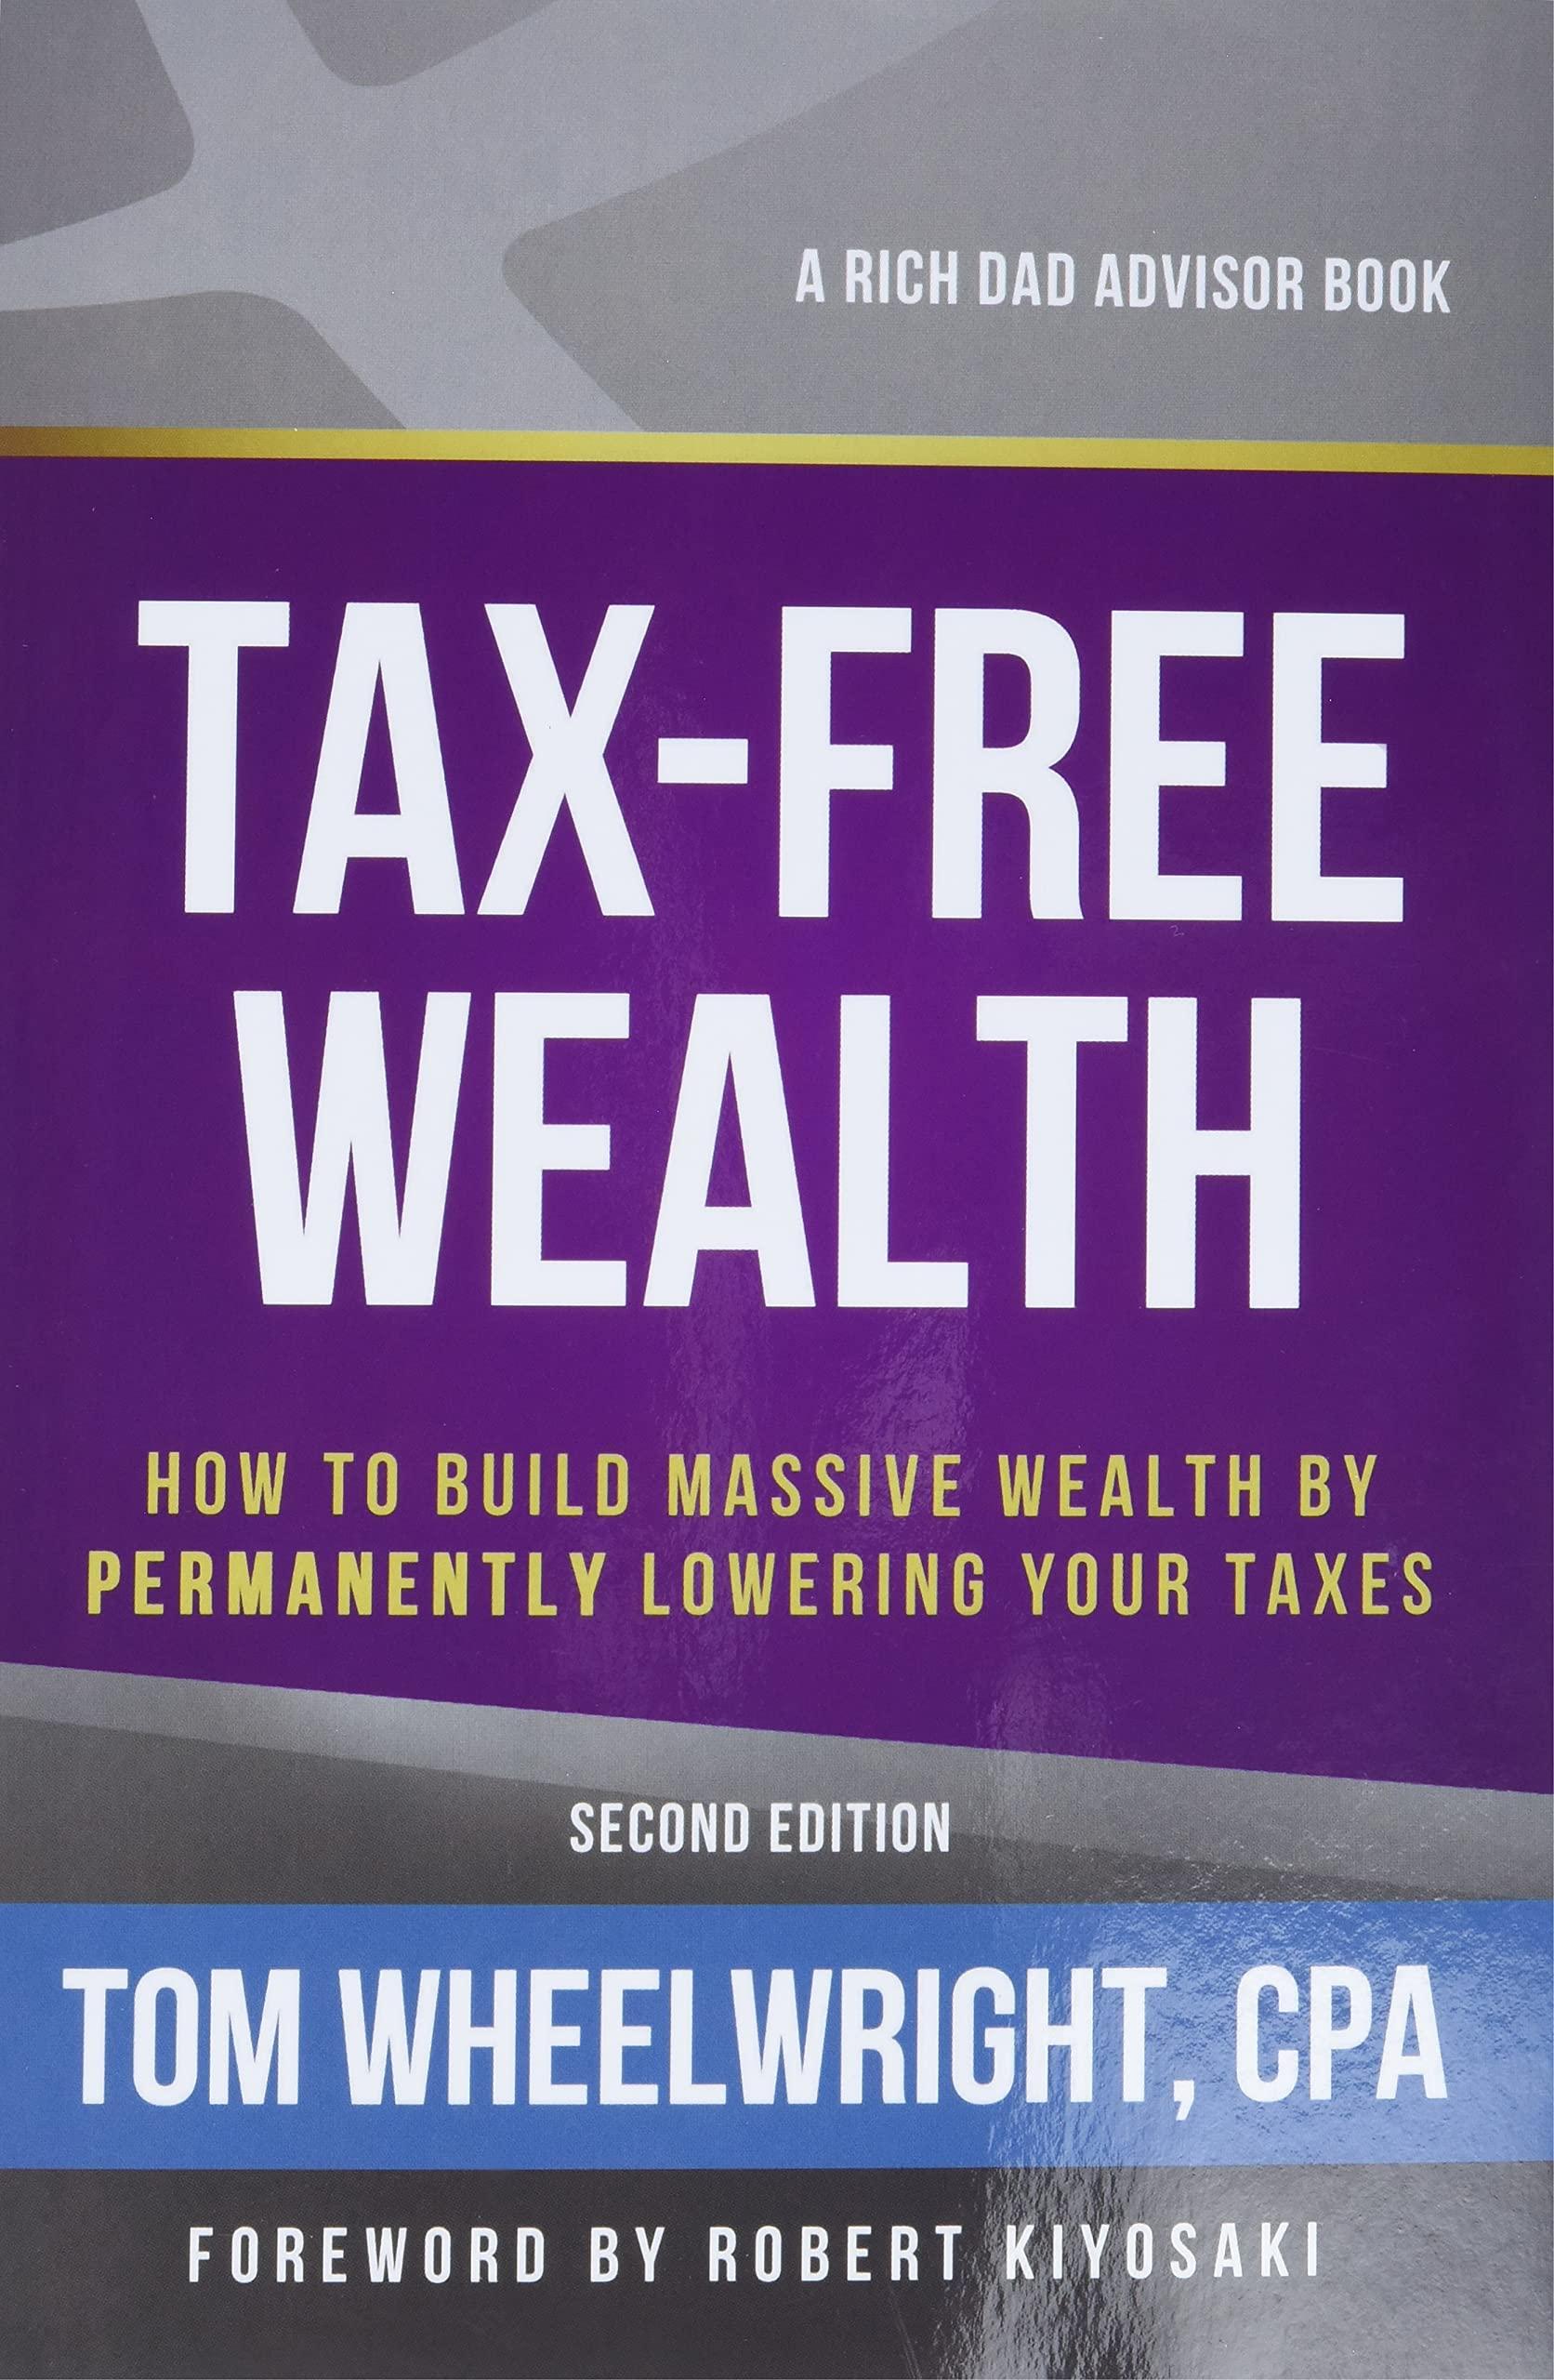 tax free wealth how to build massive wealth by permanently lowering your taxes 2nd edition tom wheelwright